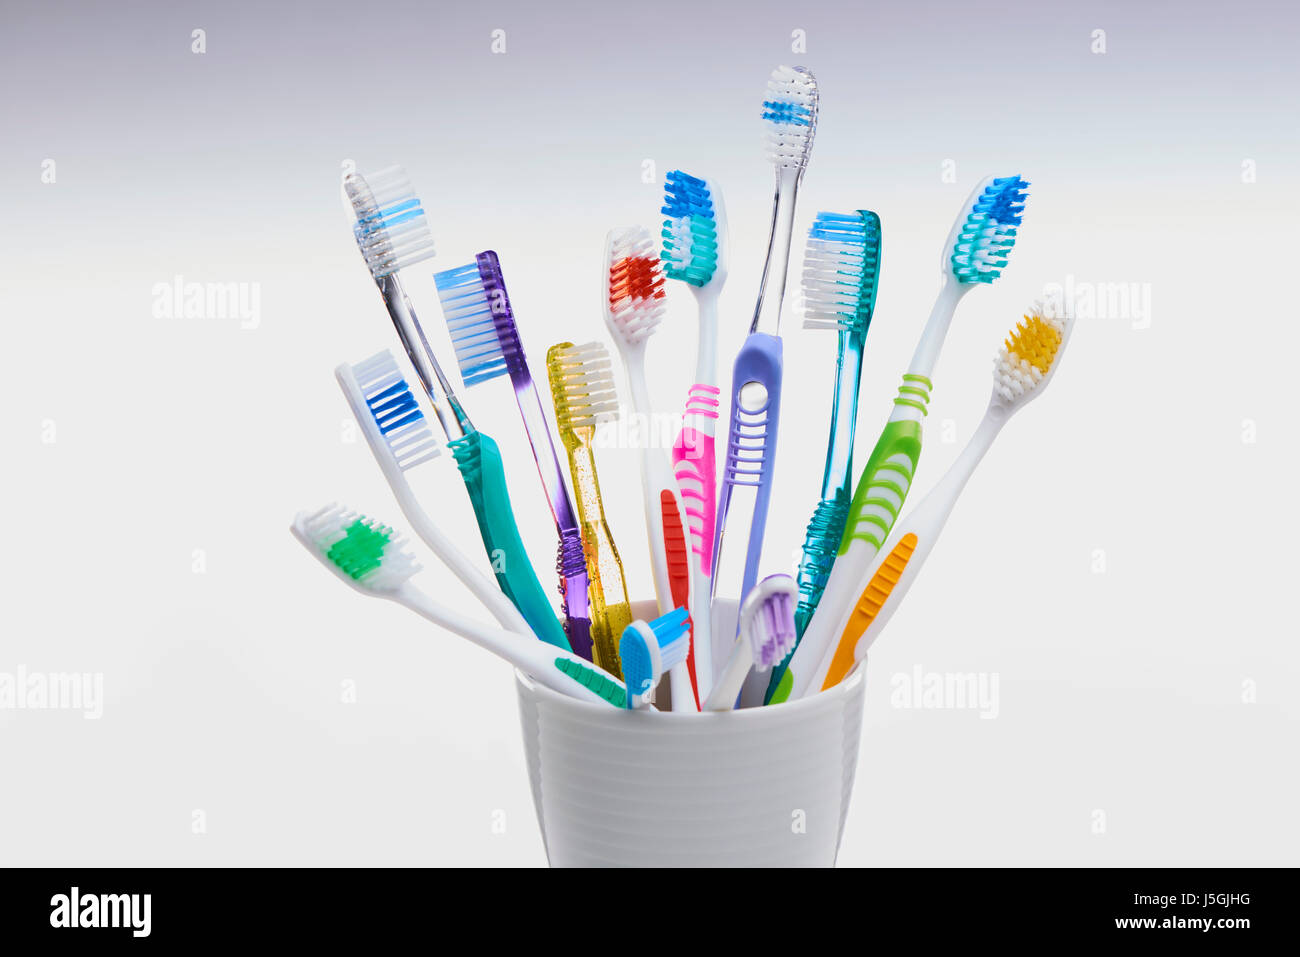 Pot of Toothbrushes Stock Photo